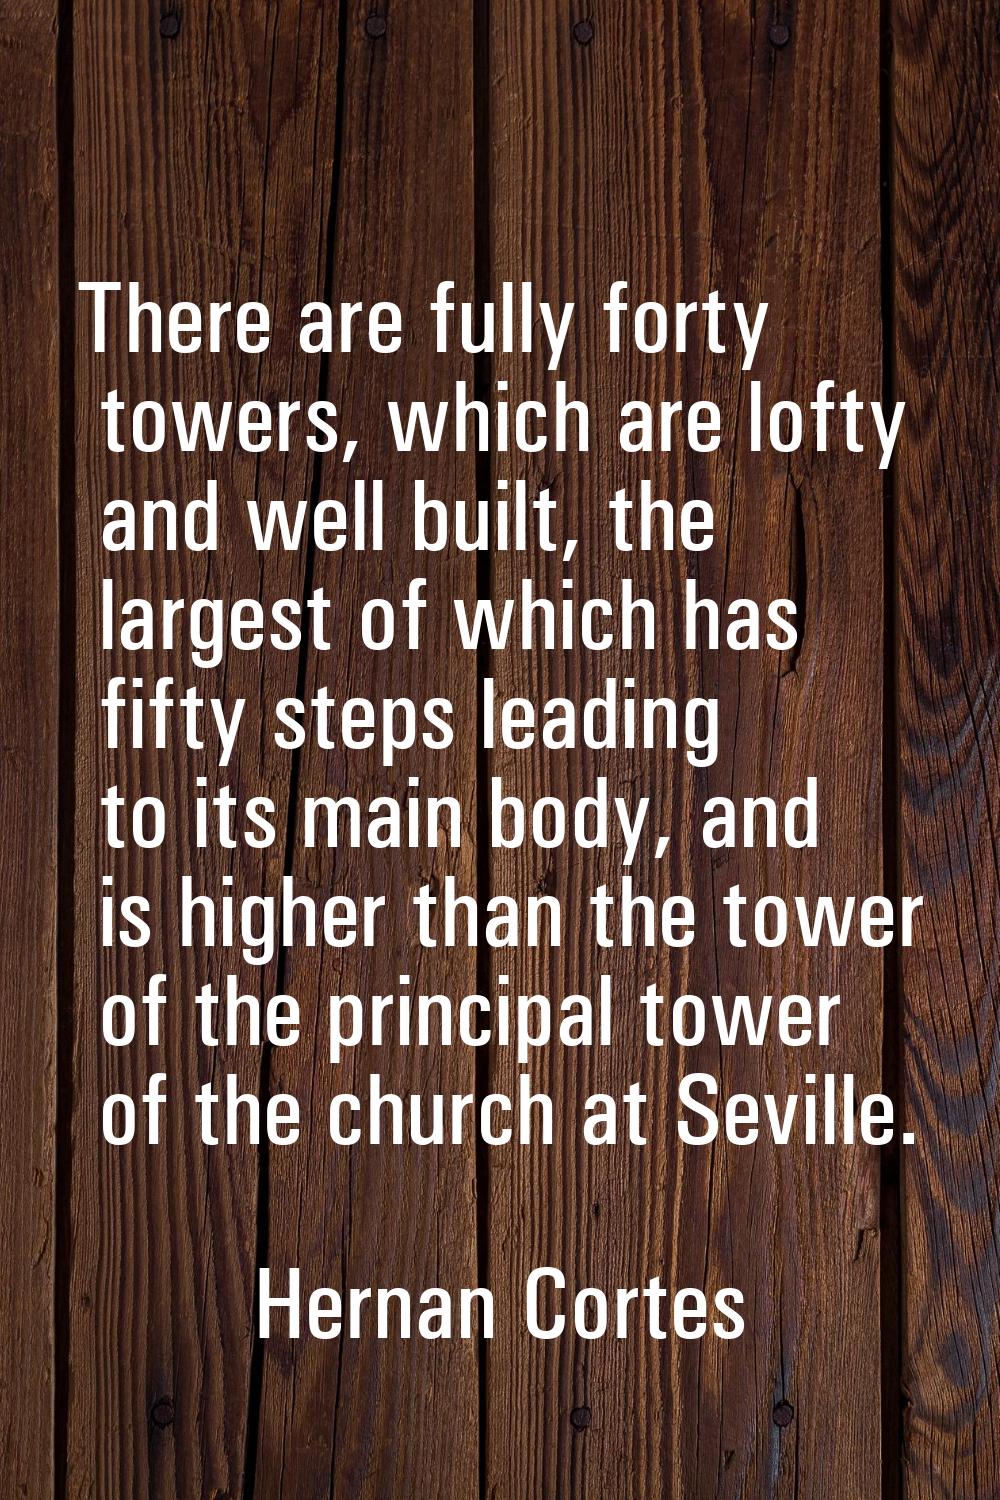 There are fully forty towers, which are lofty and well built, the largest of which has fifty steps 